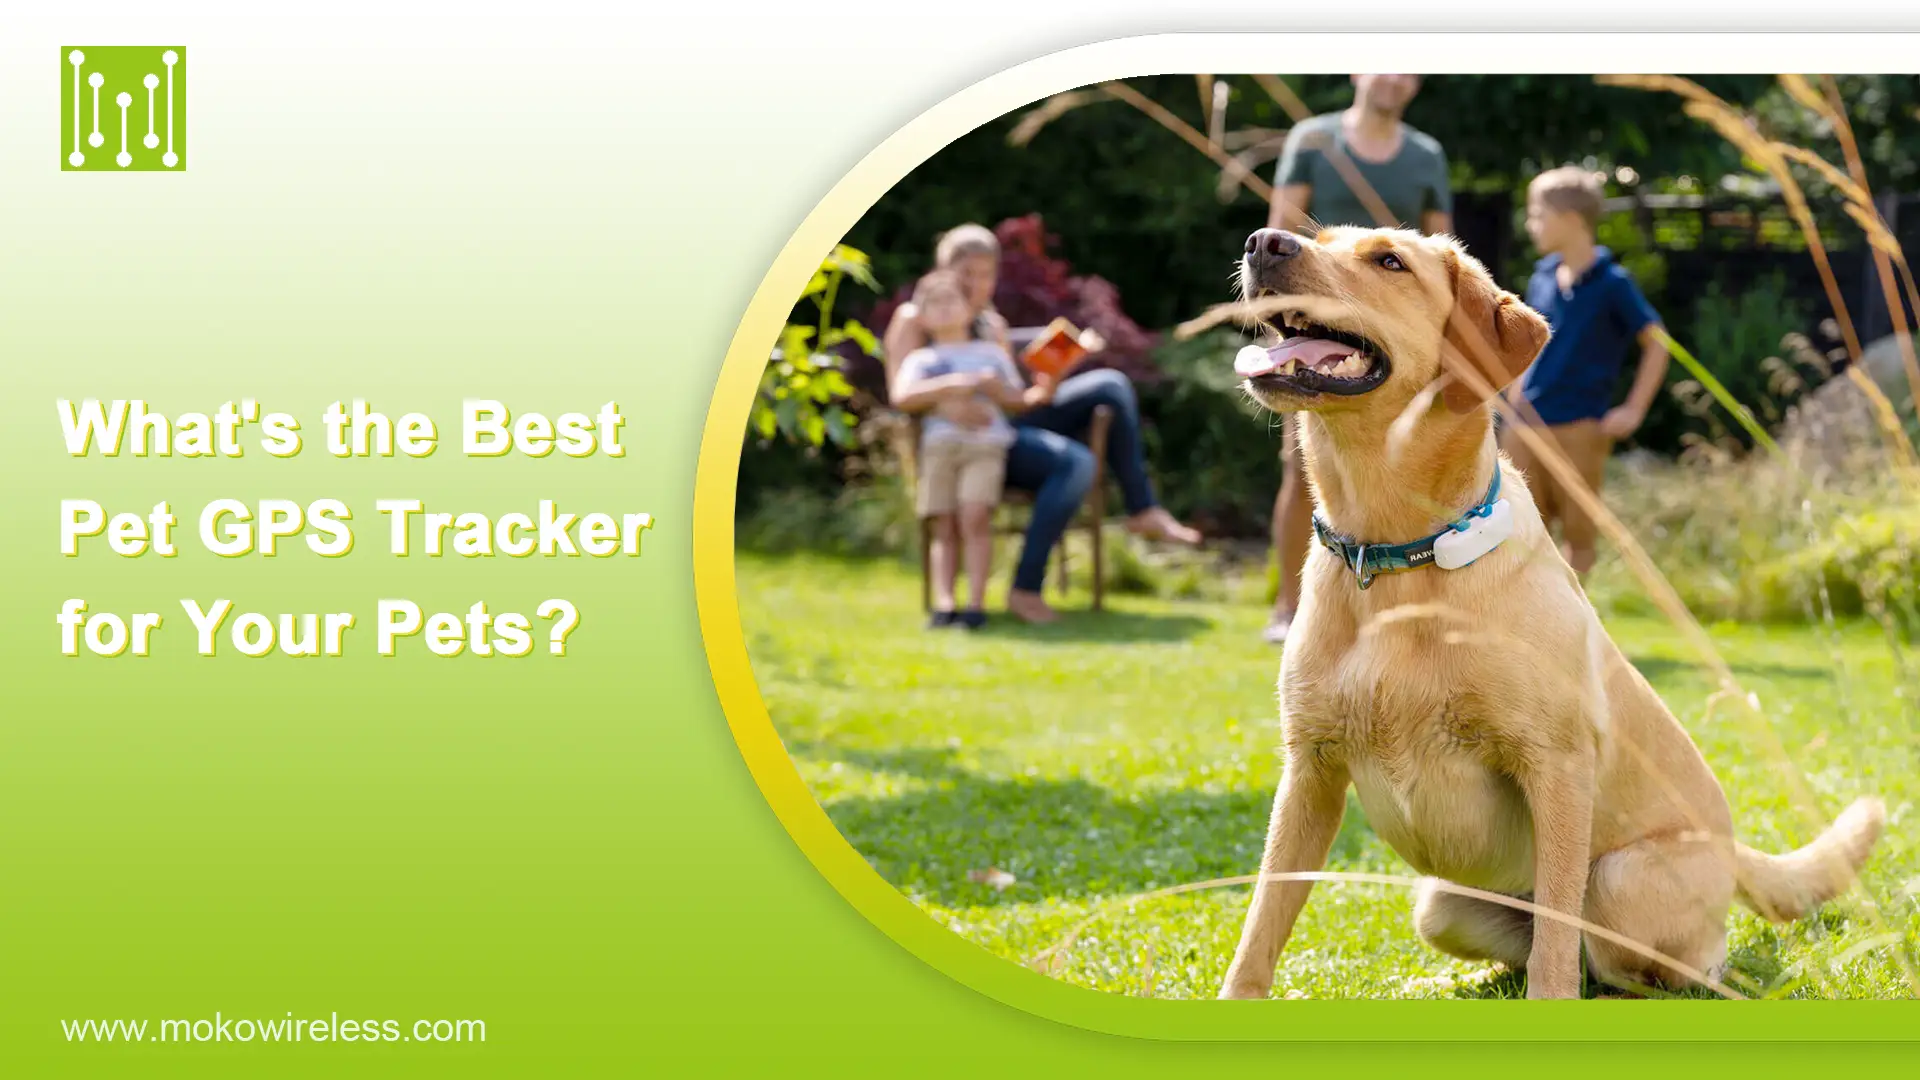 What's the Best Pet GPS Tracker for Your Pets